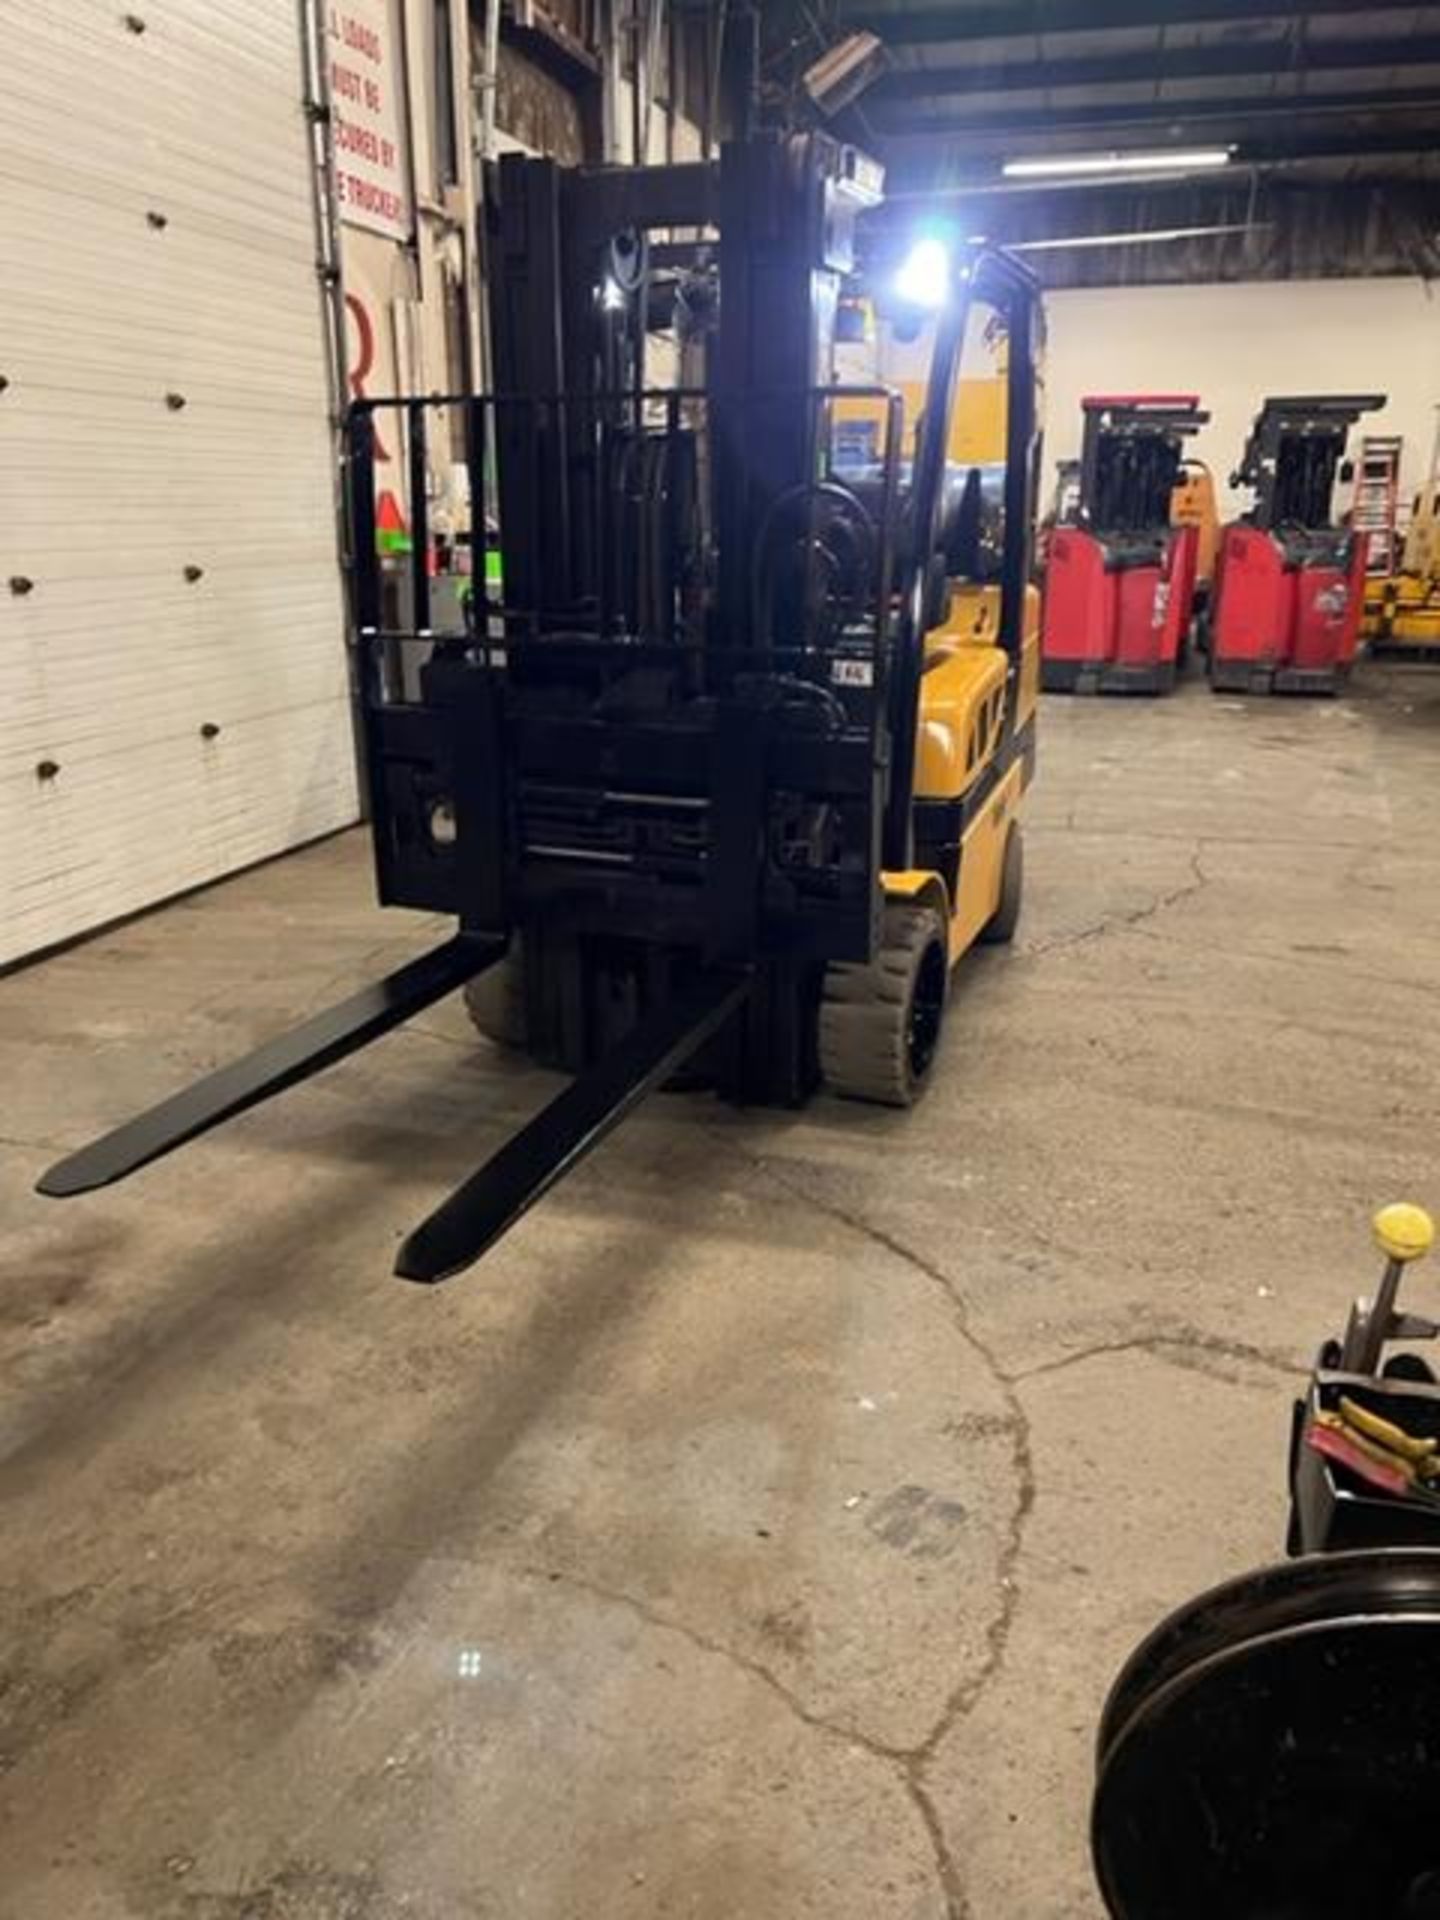 FREE CUSTOMS - NICE 2017 Yale model 80 - 8,000lbs Capacity Forklift LPG (propane) with 54" forks - Image 2 of 4